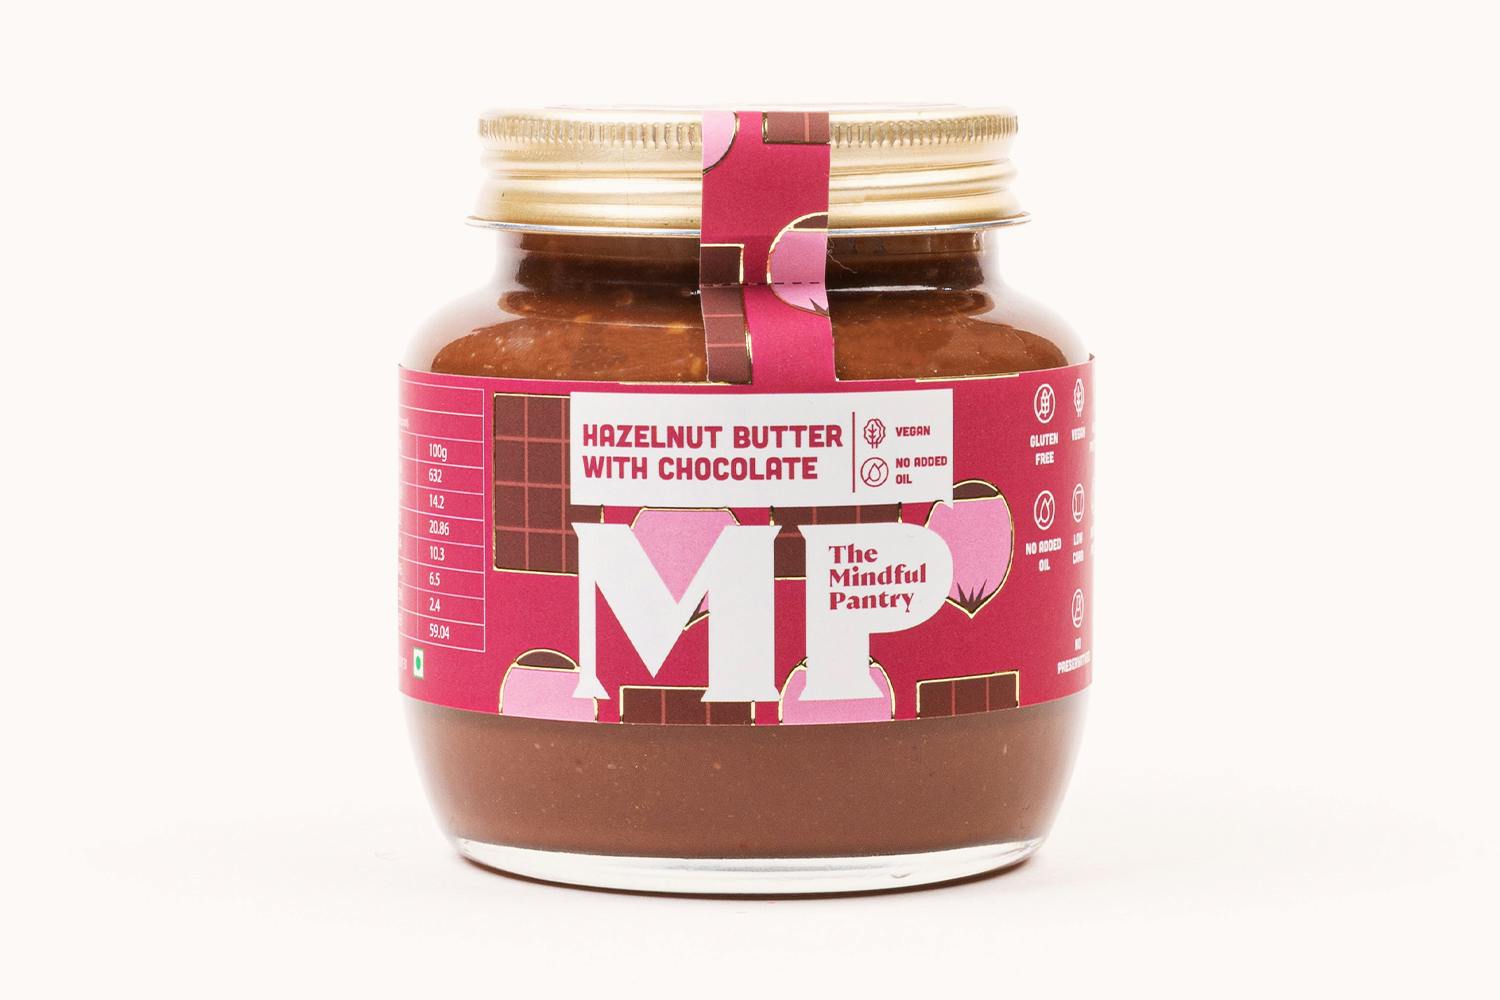 The Mindful Pantry Hazelnut Butter with Chocolate